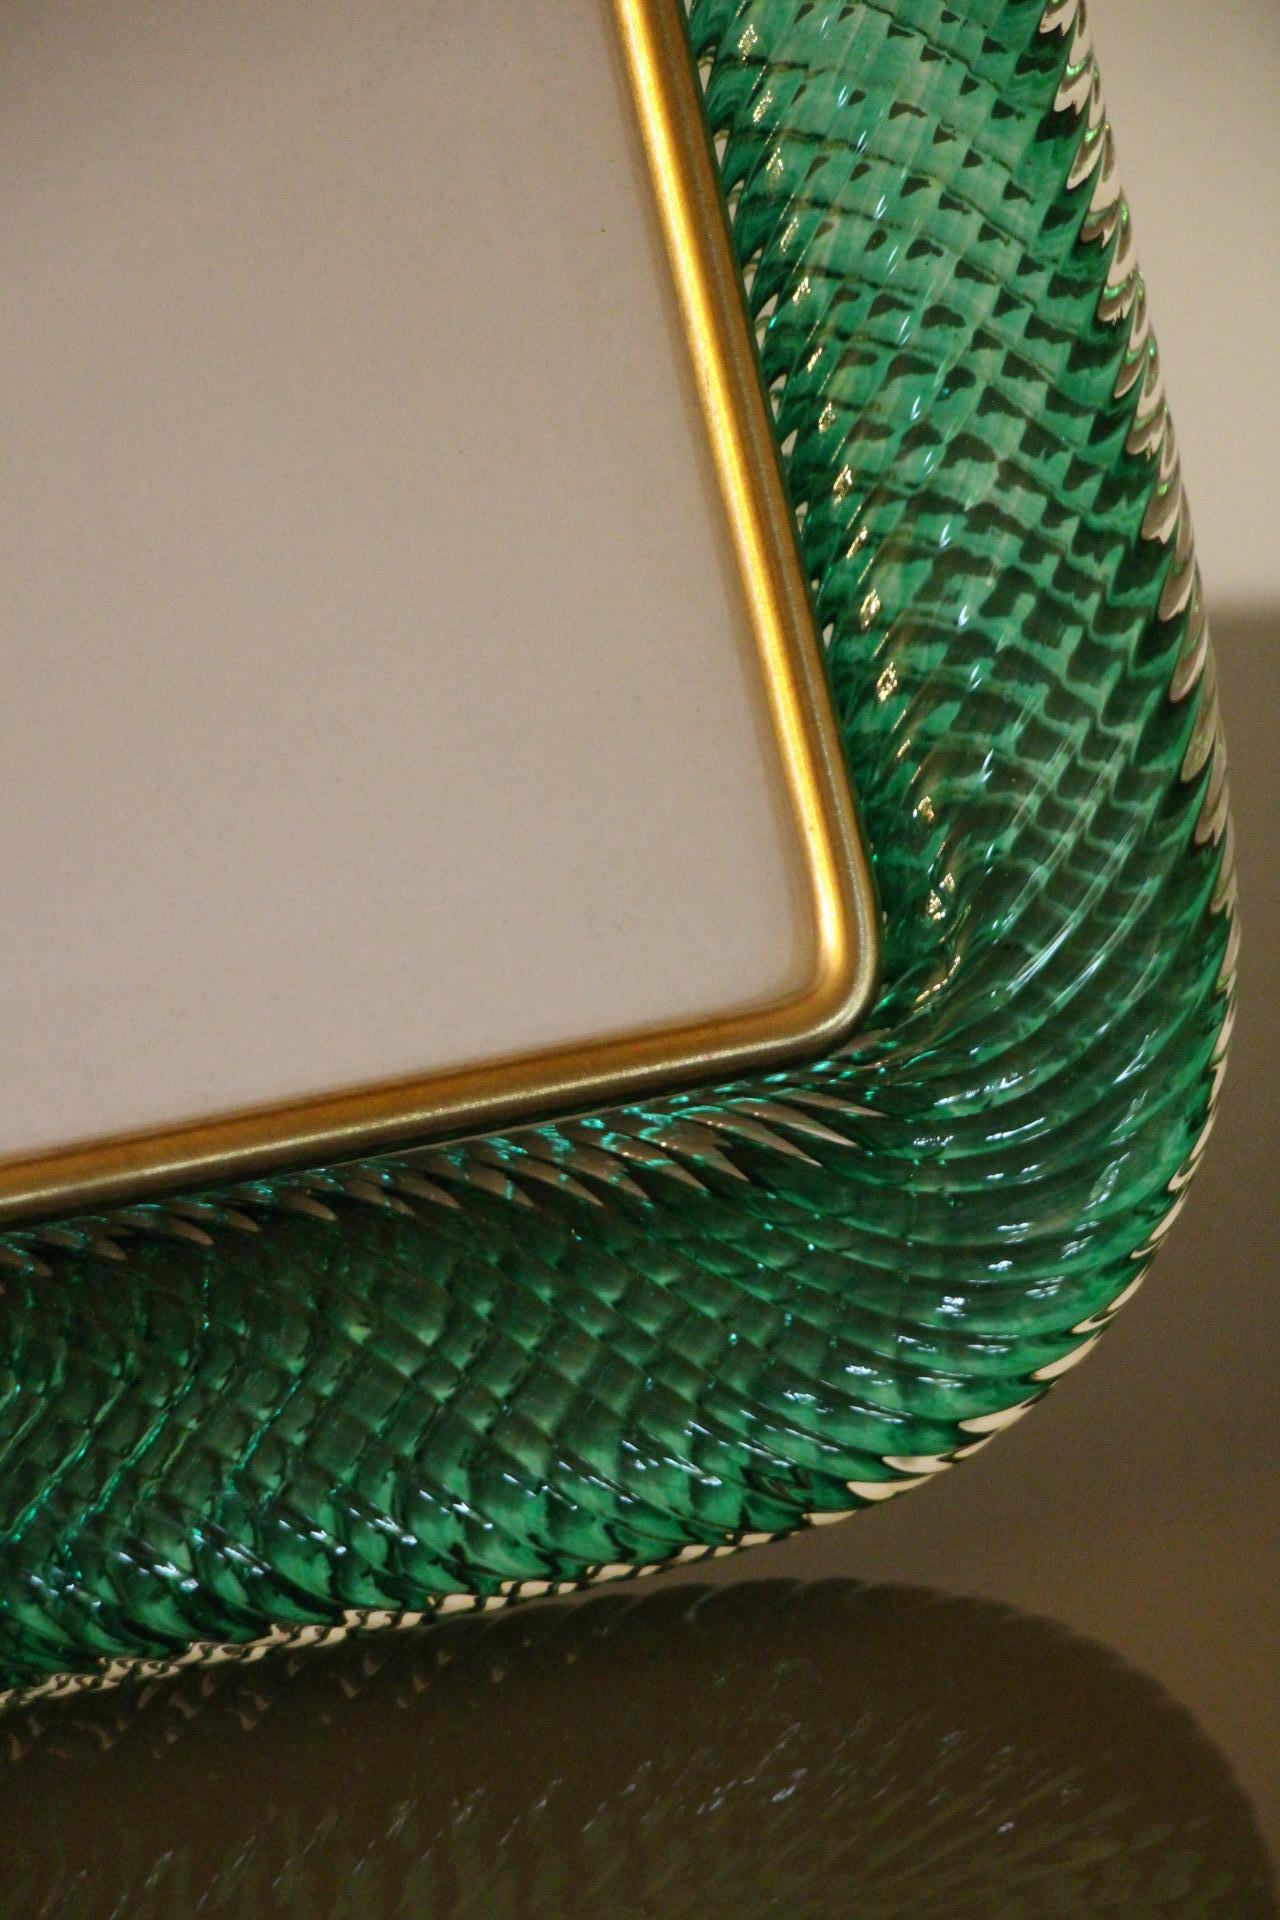 Hand-Crafted 2000's Emerald Green Twisted Murano Glass and Brass Picture Frame by Barovier 